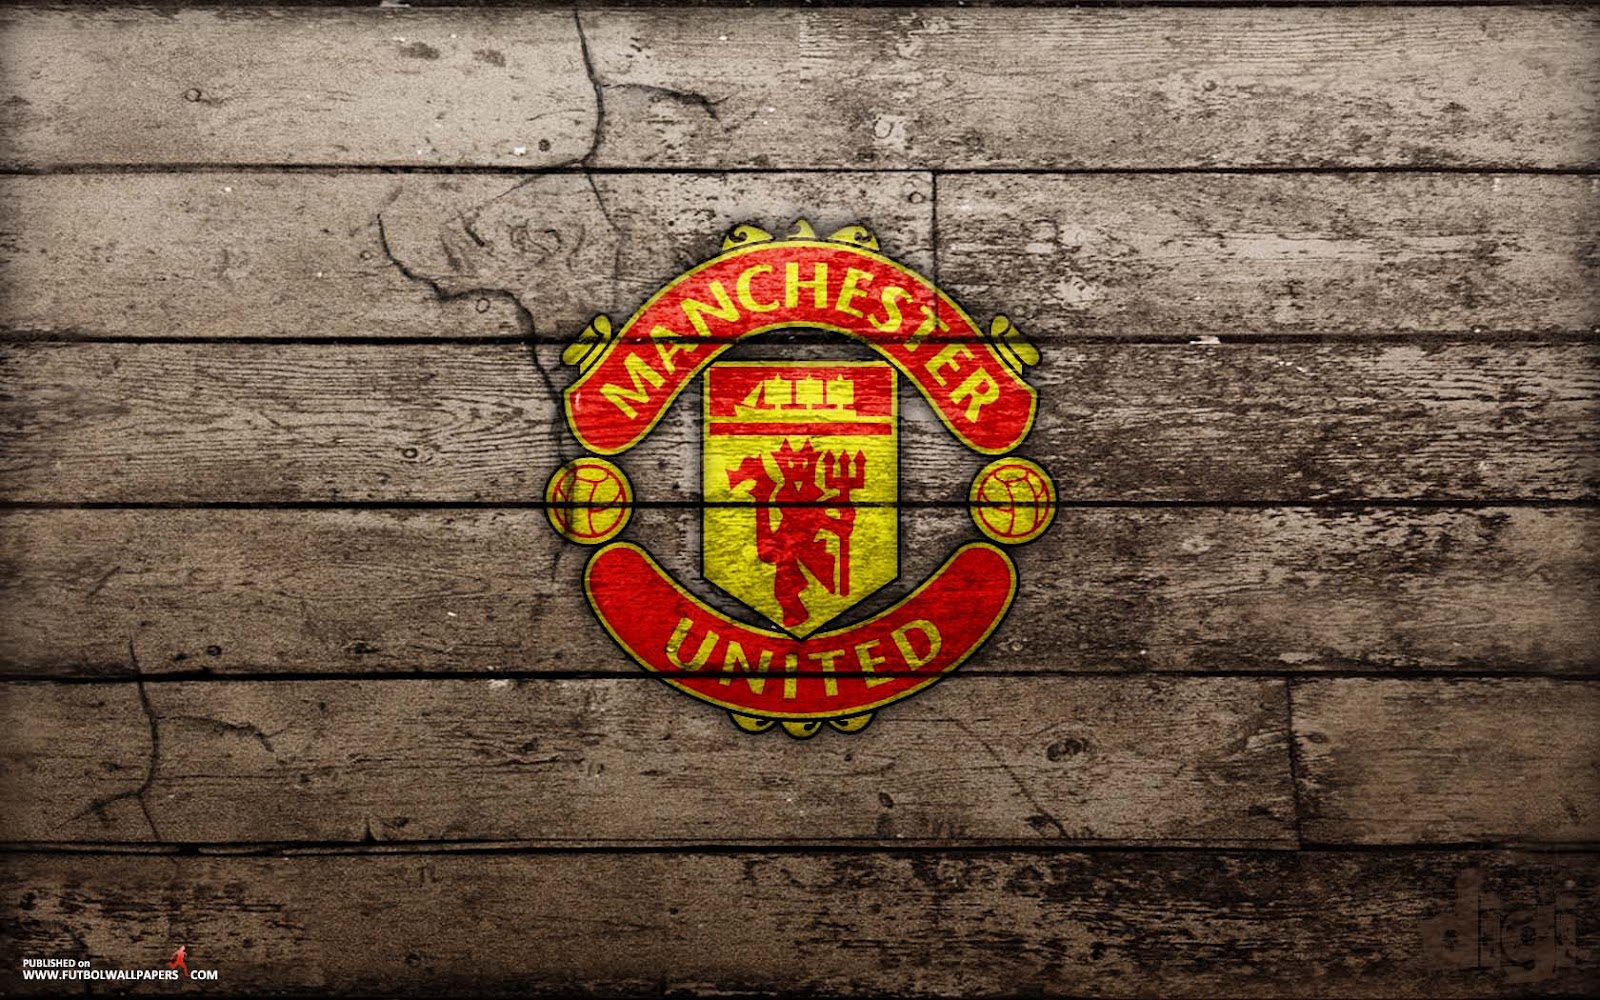  Manchester United Logo Wallpaper 3 Manchester United Wallpapers